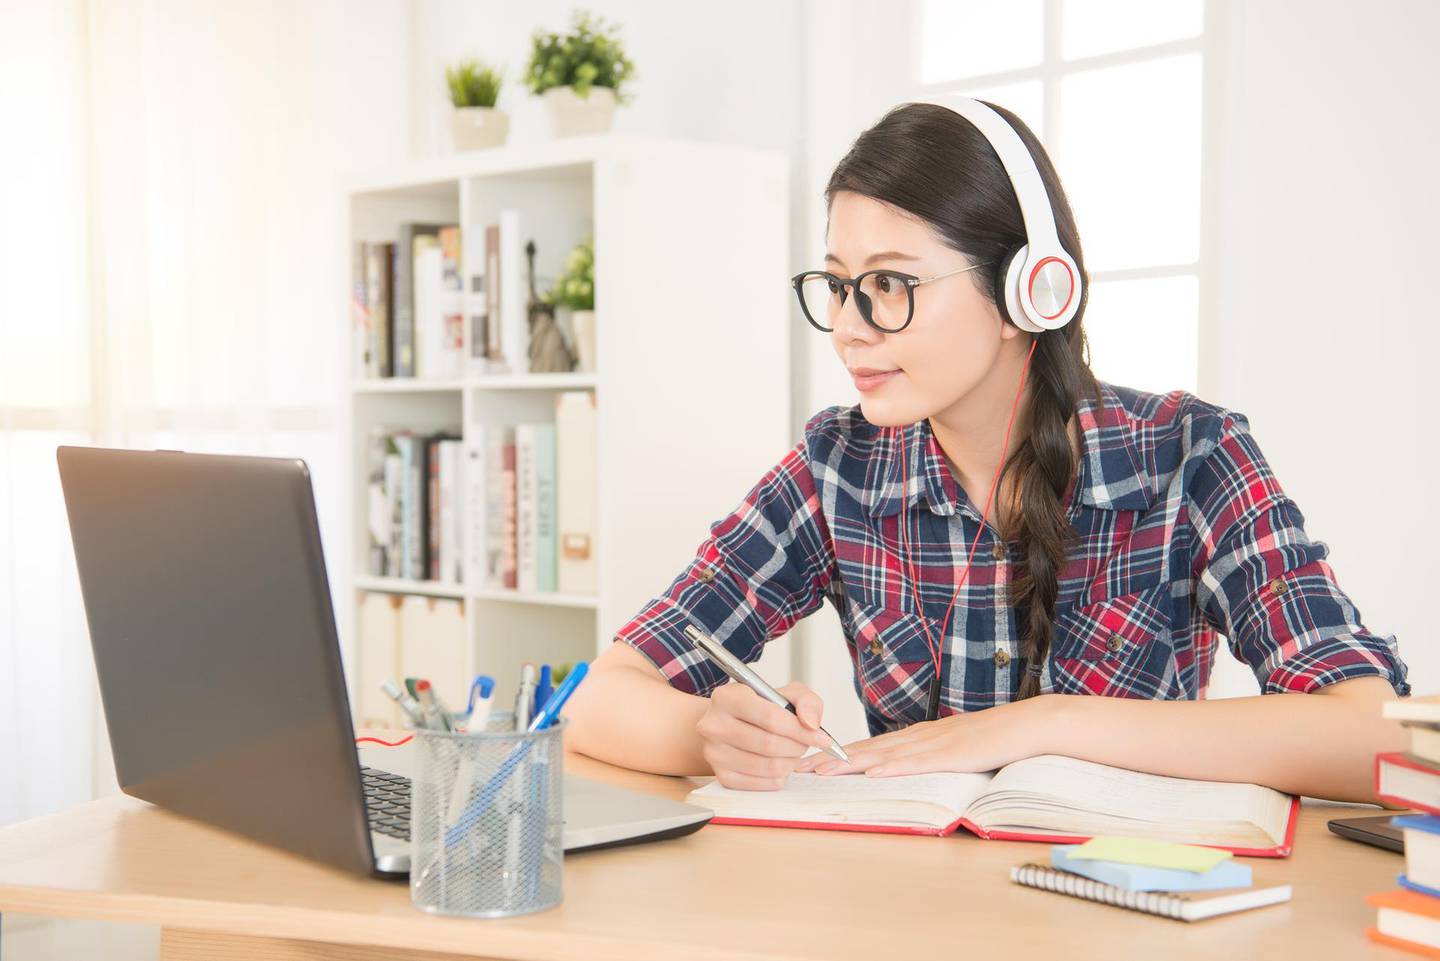 student learning on line with headphones and laptop. mixed race asian chinese model.; Shutterstock ID 549162715; Case Reference: Debi Mauger; Publication Title: B0001 POA Flyer; Division: R & P PQS/Kin Hoang; Project Code: 82054036